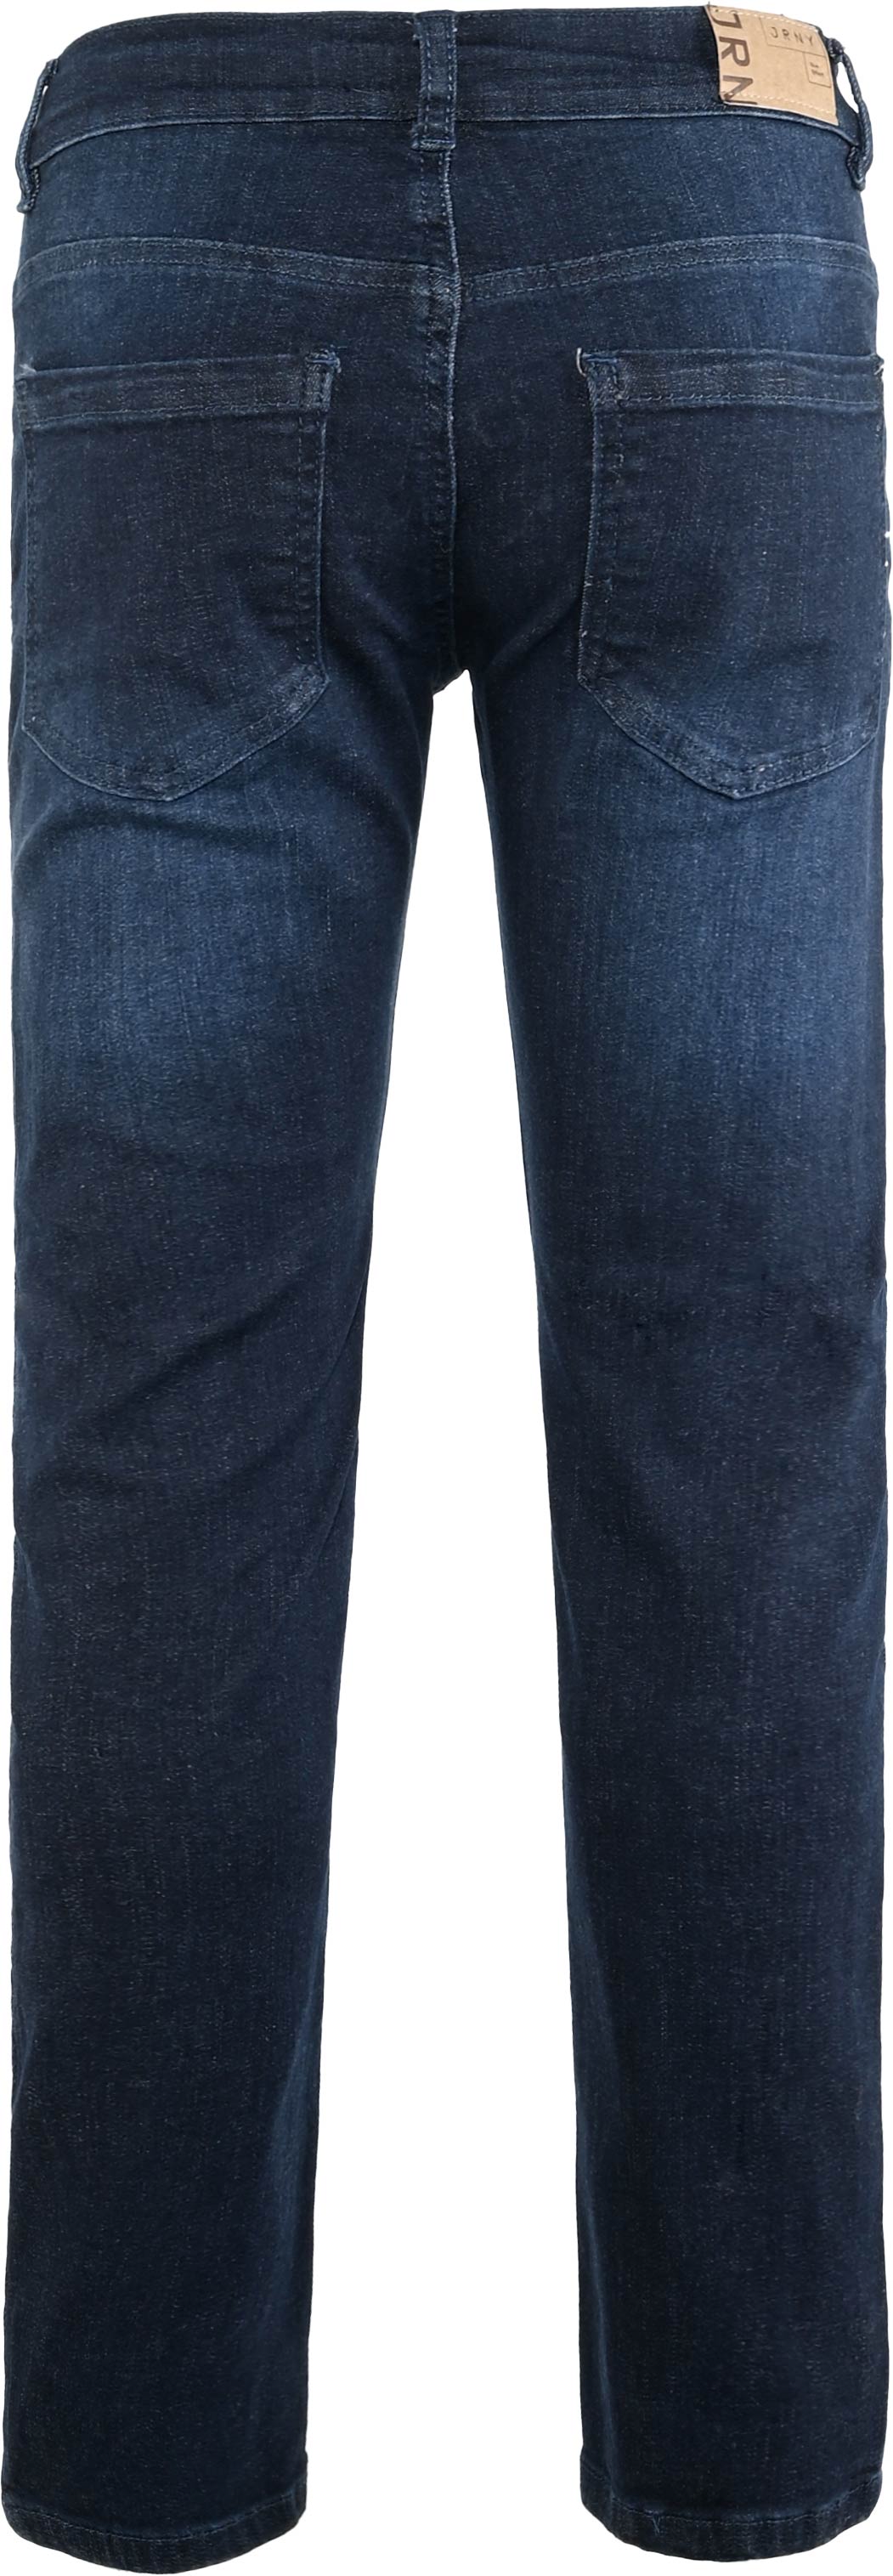 2902-JRNY Relaxed Fit Jean Boys, Sustainable, verfügbar in Normal